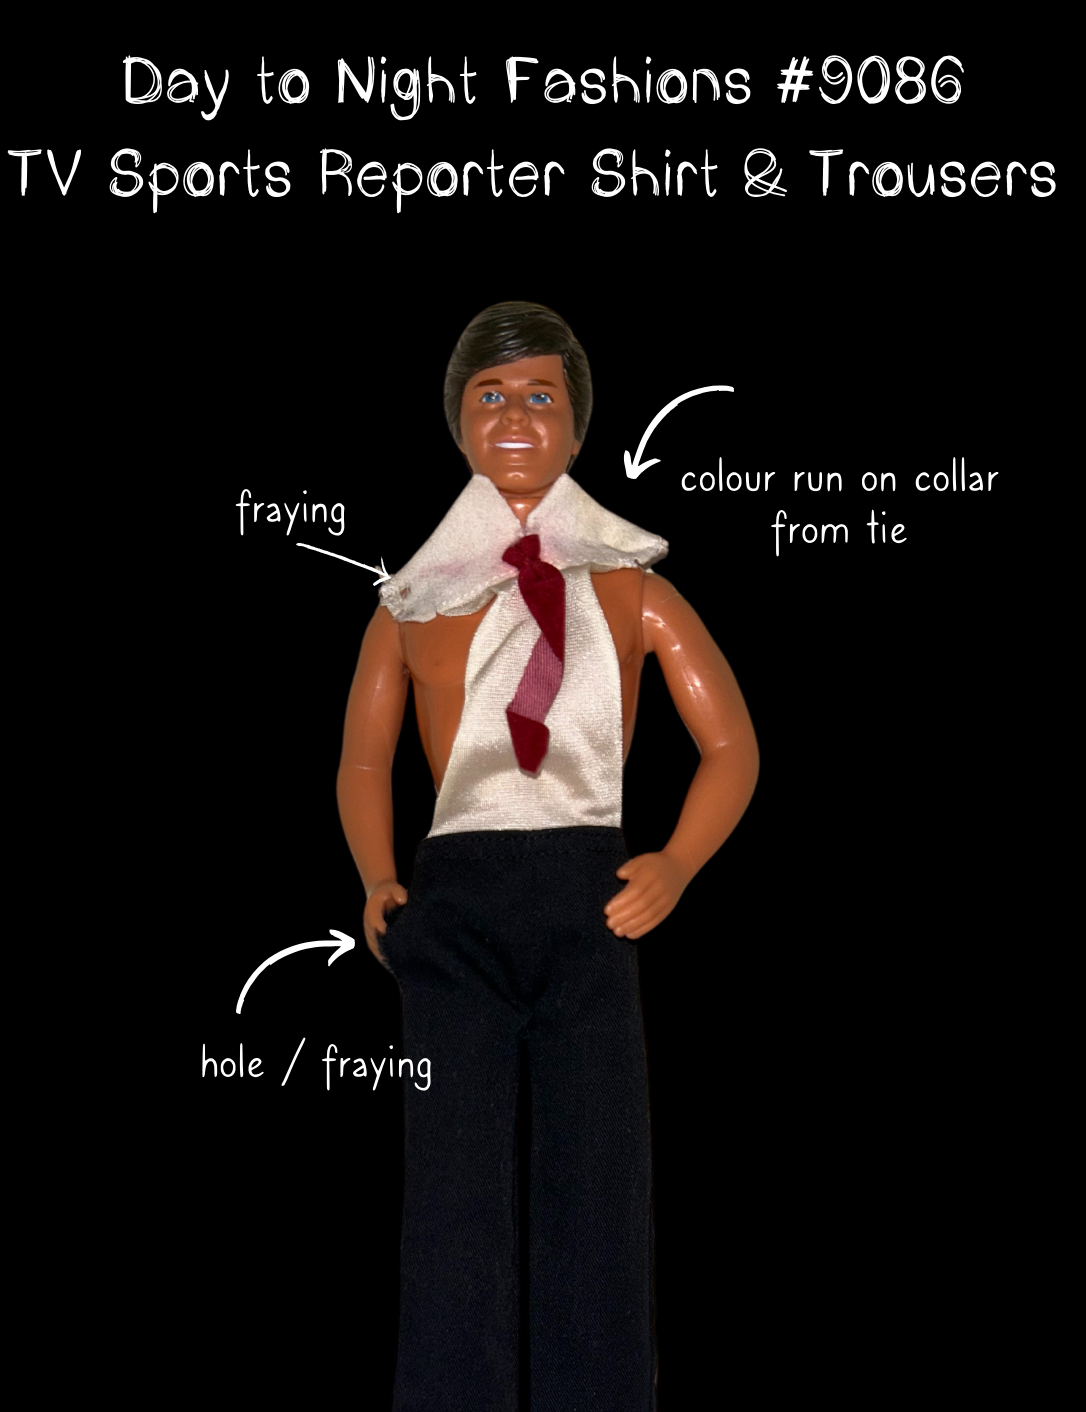 1985 Day to Night Fashions #9086 TV Sports Reporter Shirt and Trousers